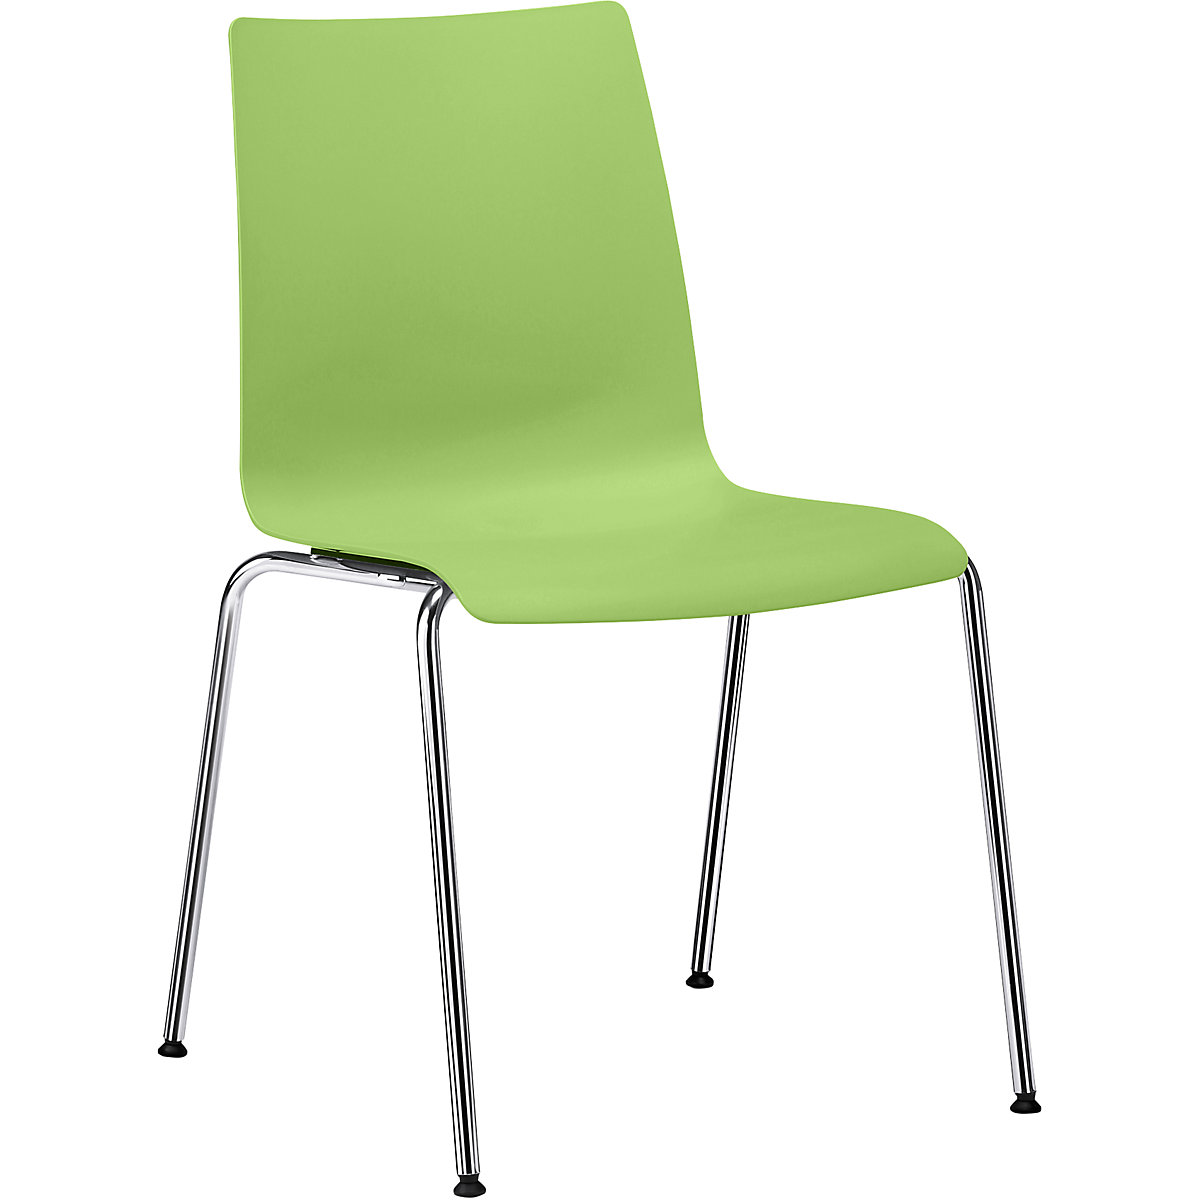 SNIKE contoured plastic chair – interstuhl, one piece seat made of PP, green-4